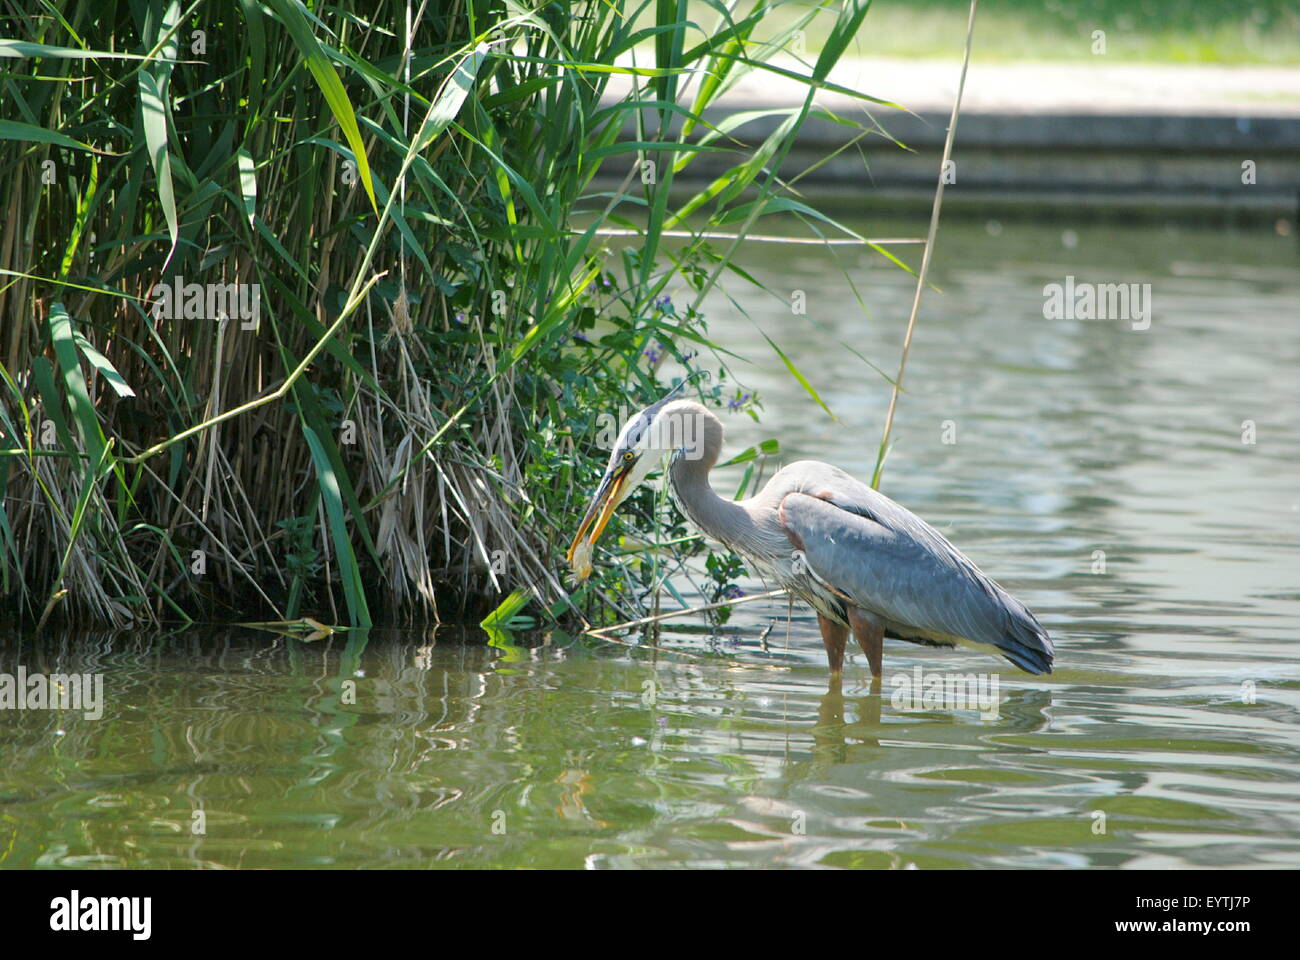 The Great Blue Heron, stalks for a meal, around a island at the pond. Stock Photo